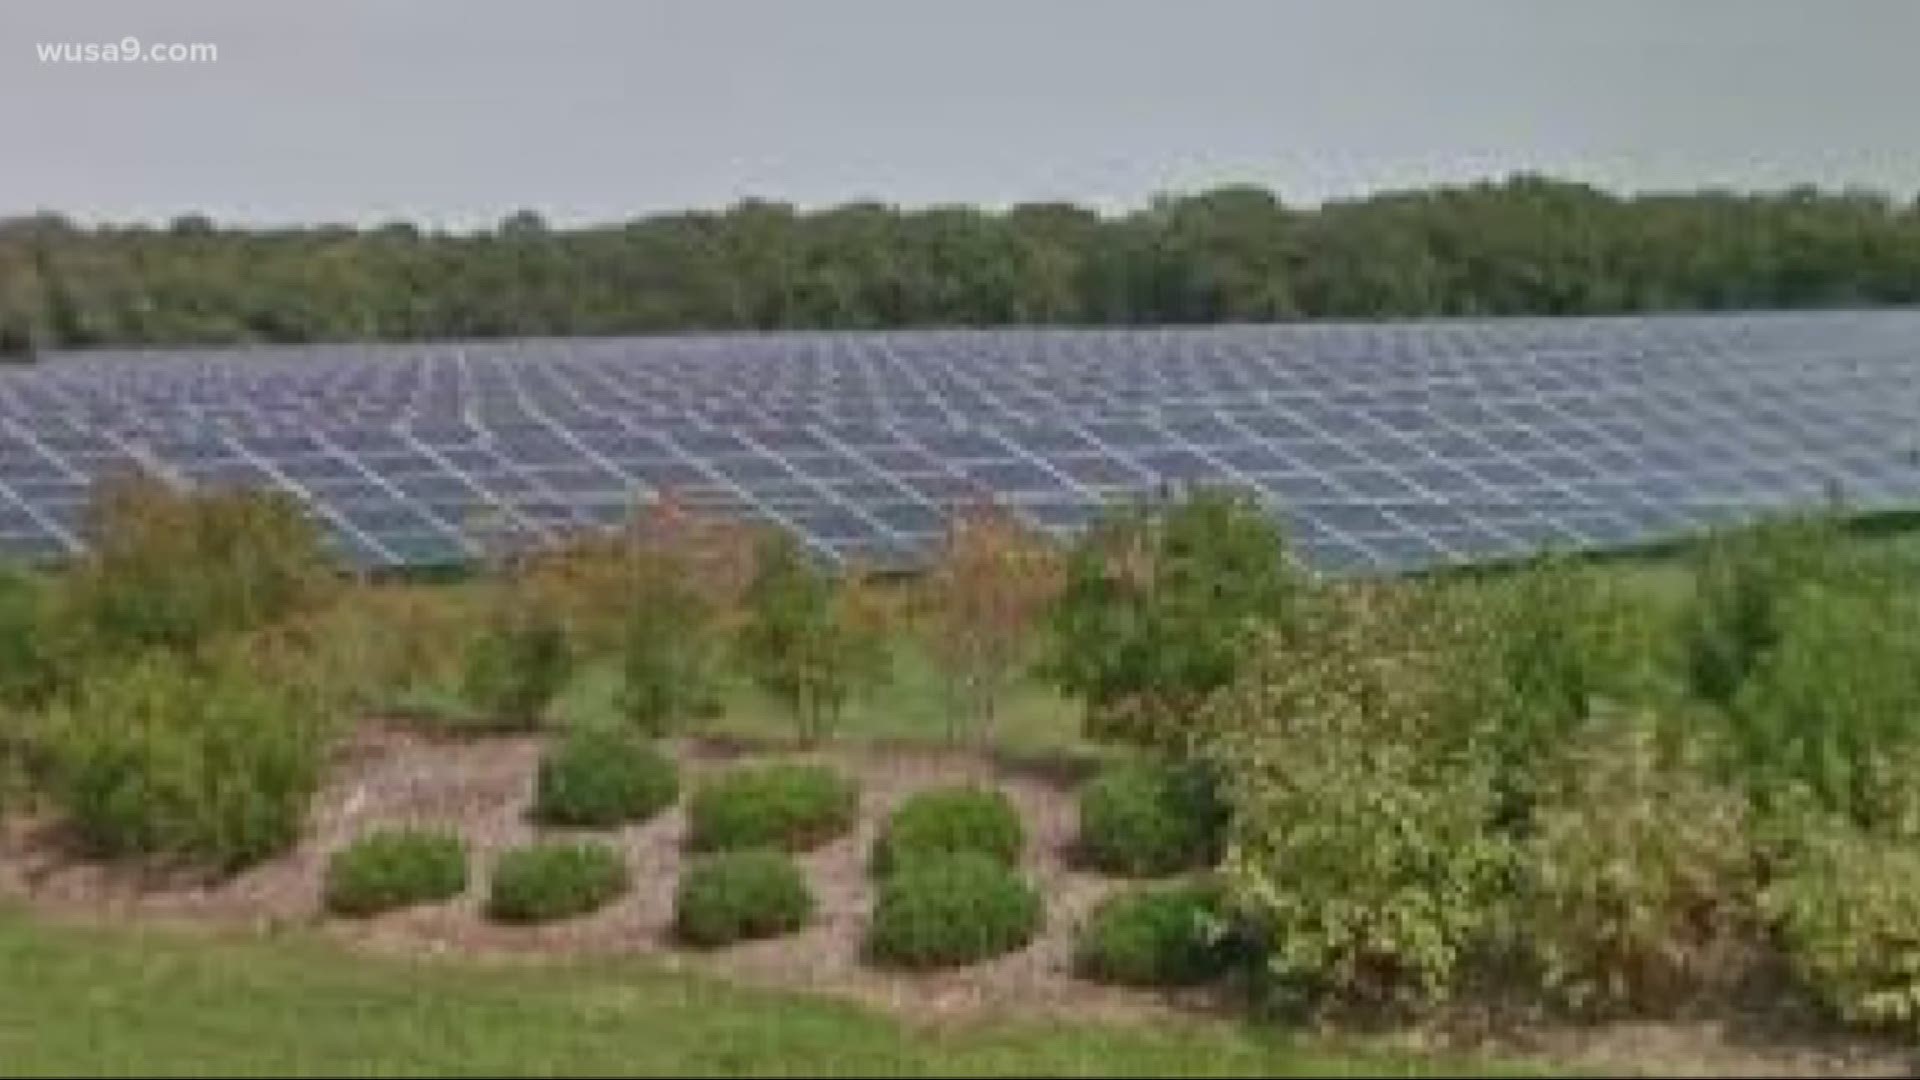 The largest solar plant east of the Rockies could be coming to Spotsylvania County, Virginia.